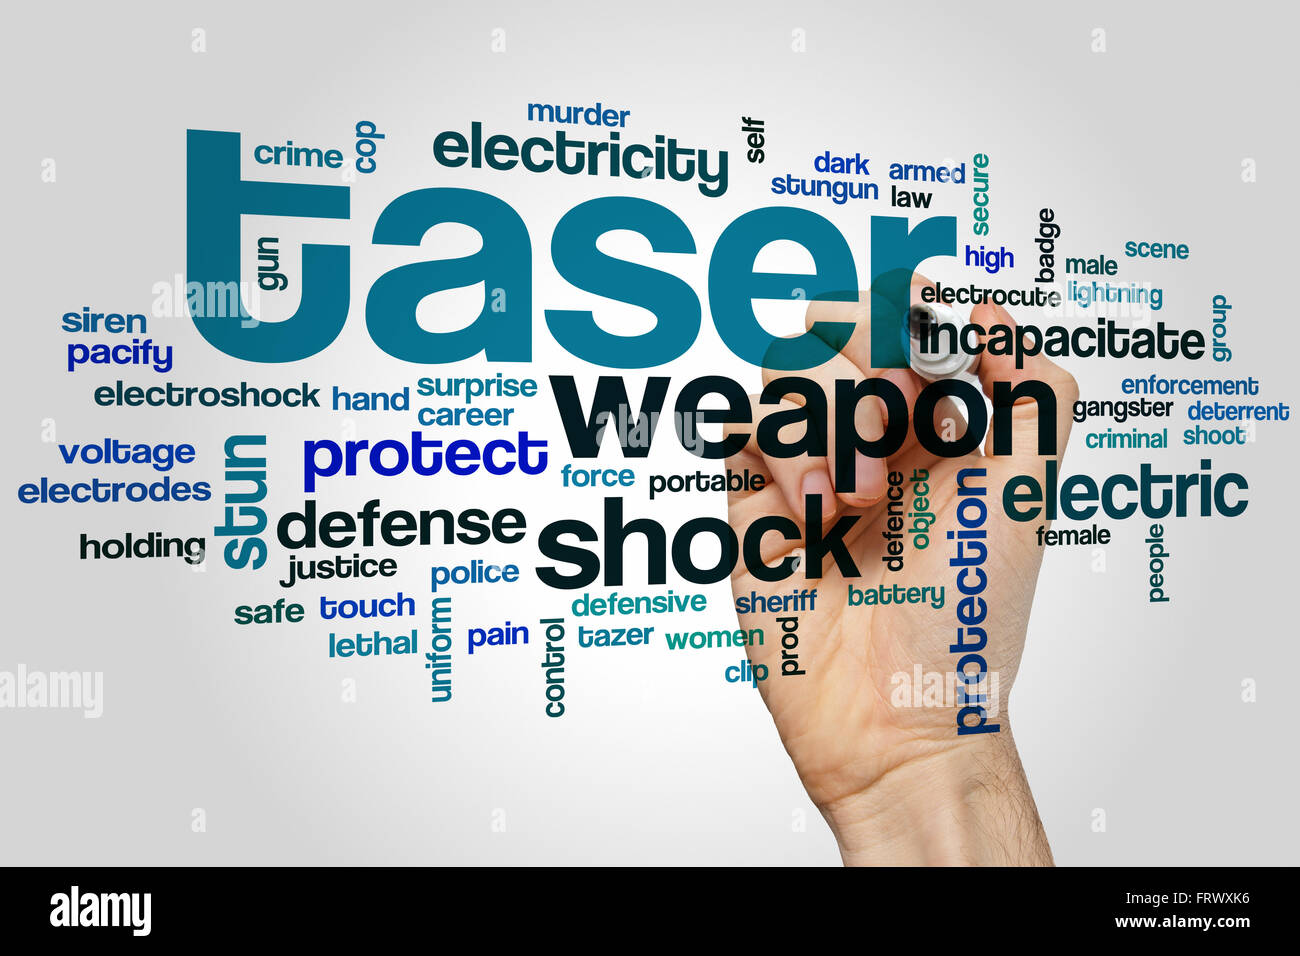 Taser word cloud concept with shock protection related tags Stock Photo